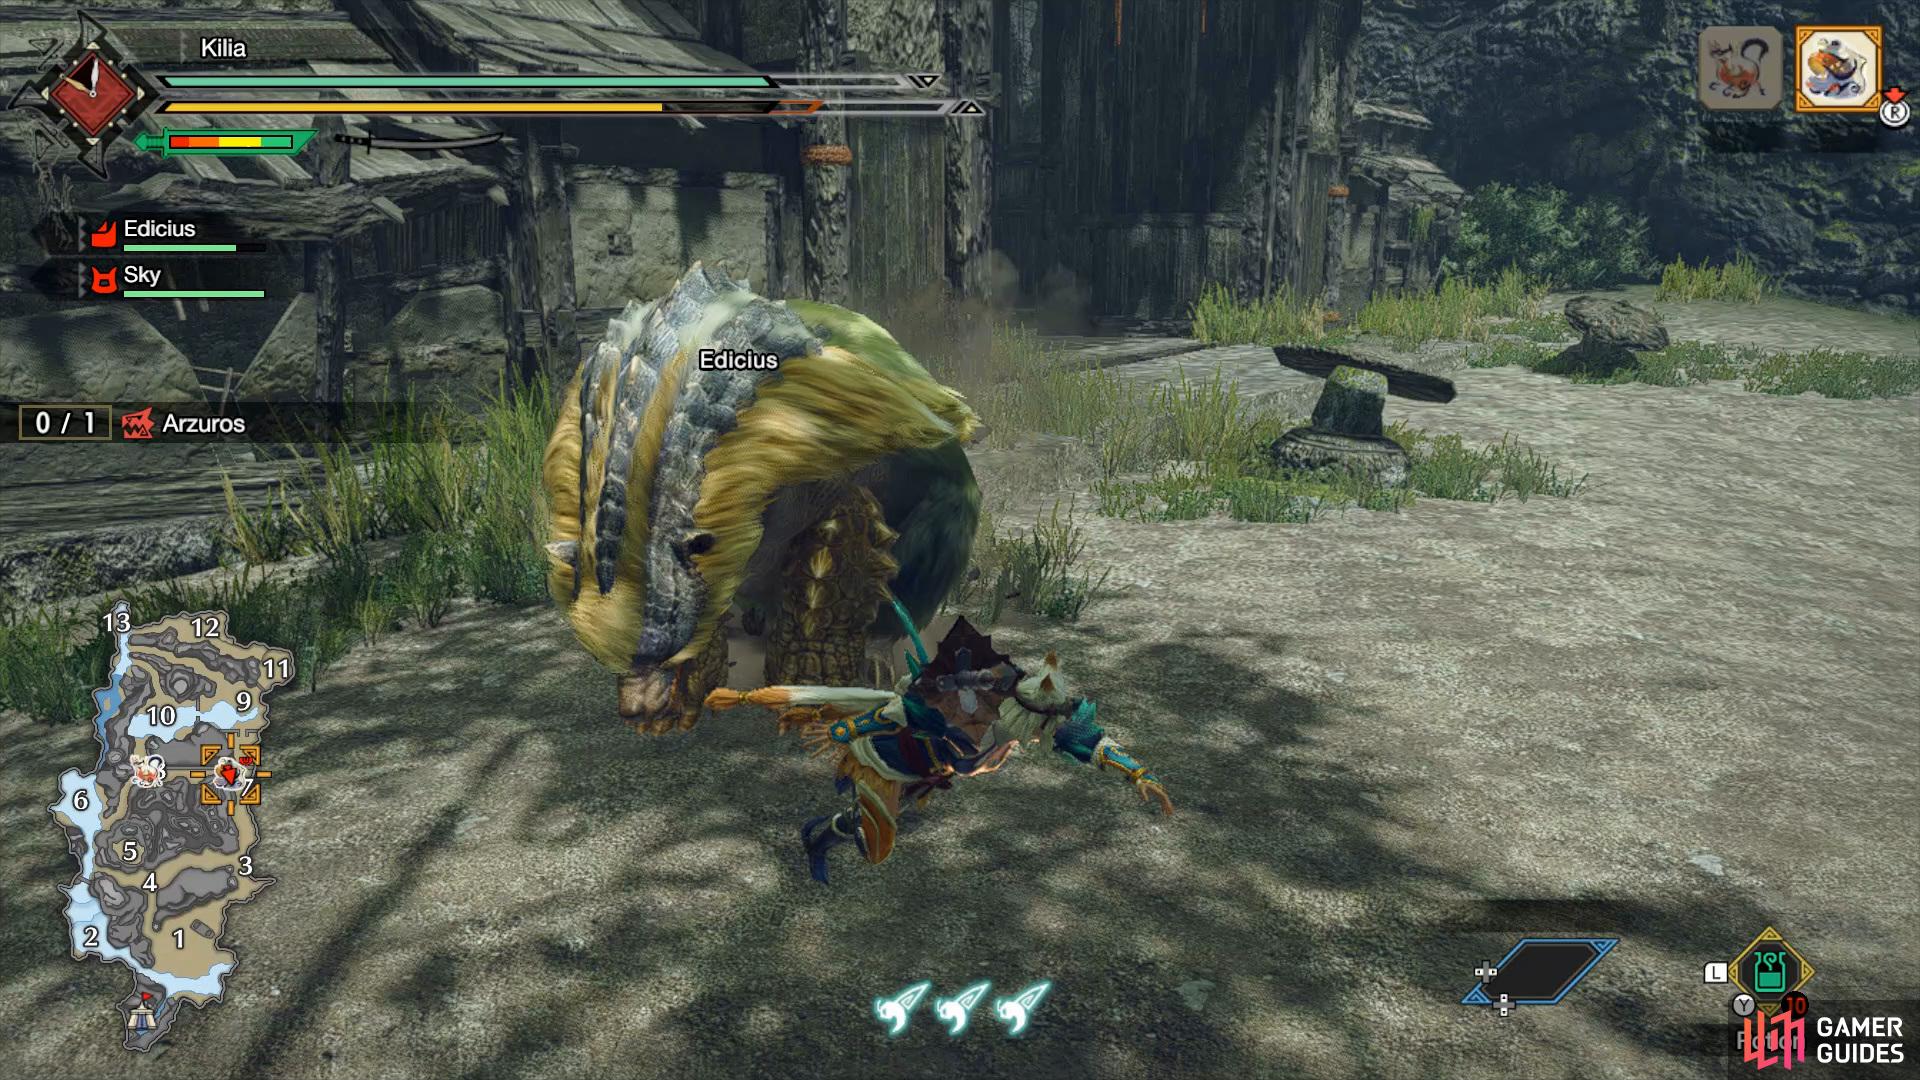 When Arzuros gets on all fours, move to the side. 